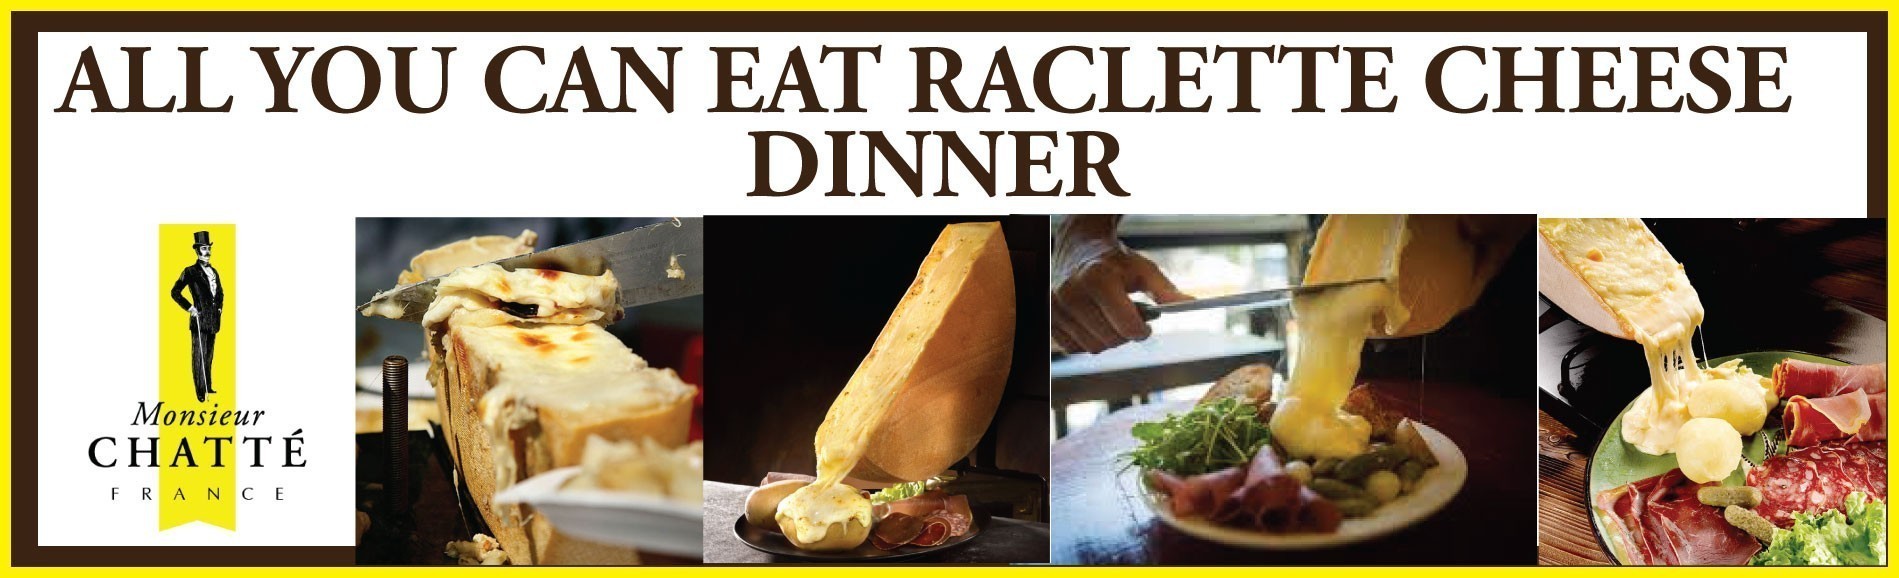 All you can eat Raclette Dinner 6.30pm to 9.30pm